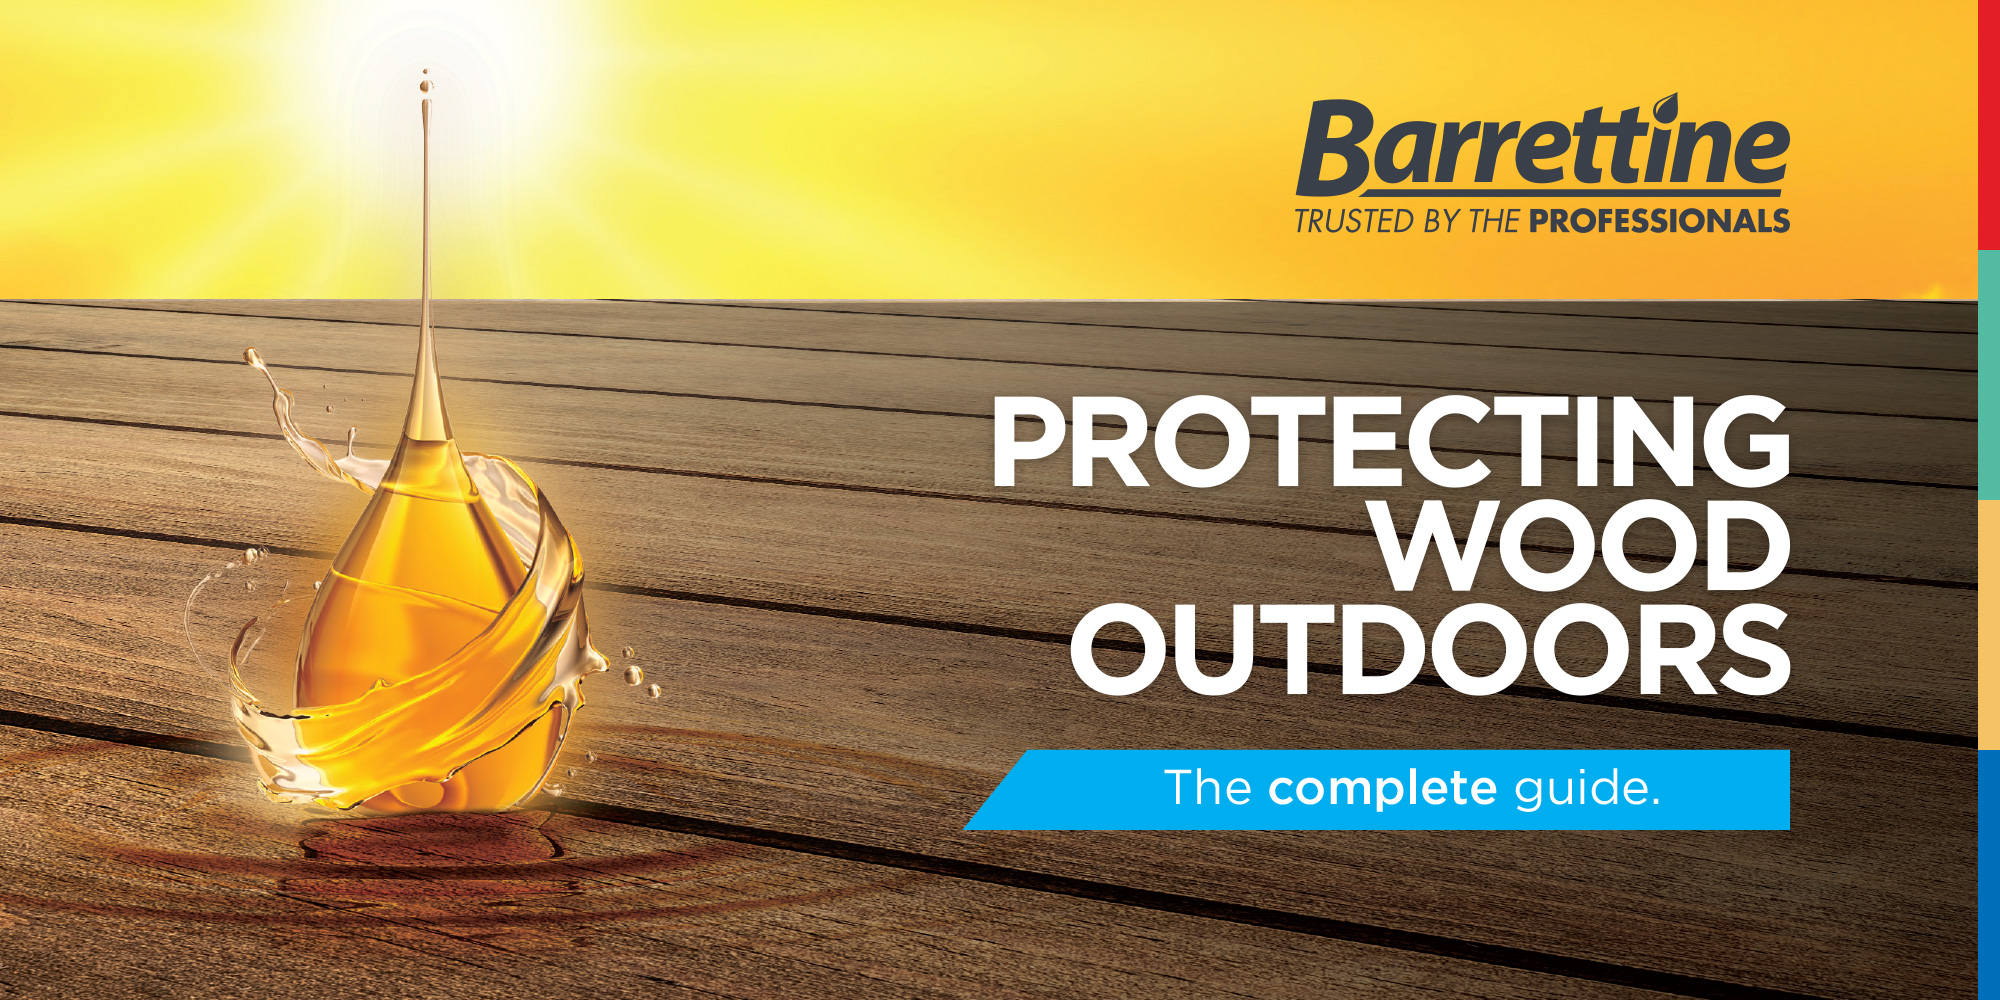 Protecting wood outdoors